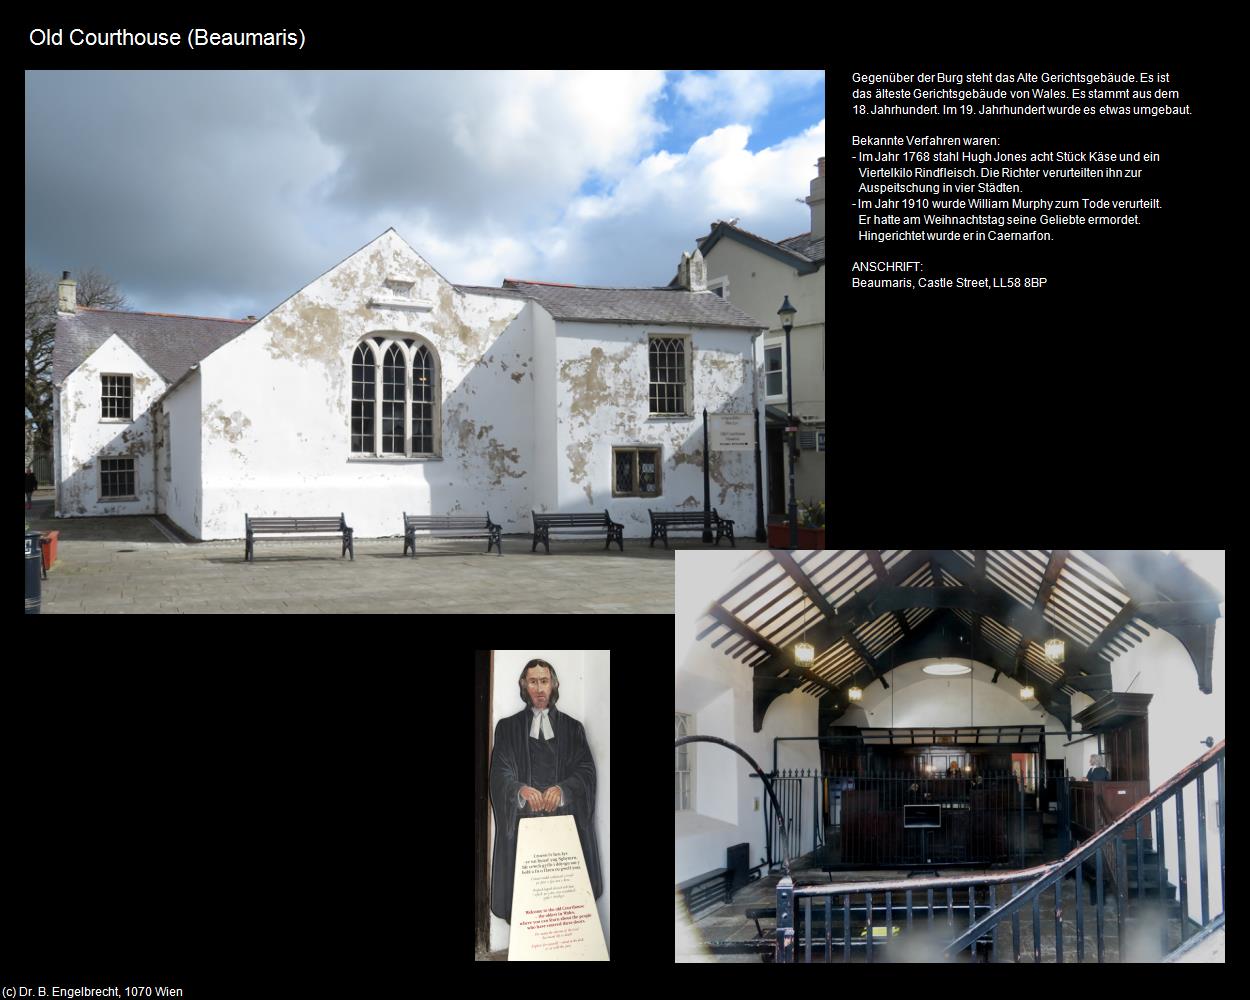 Old Courthouse  (Beaumaris, Wales) in Kulturatlas-ENGLAND und WALES